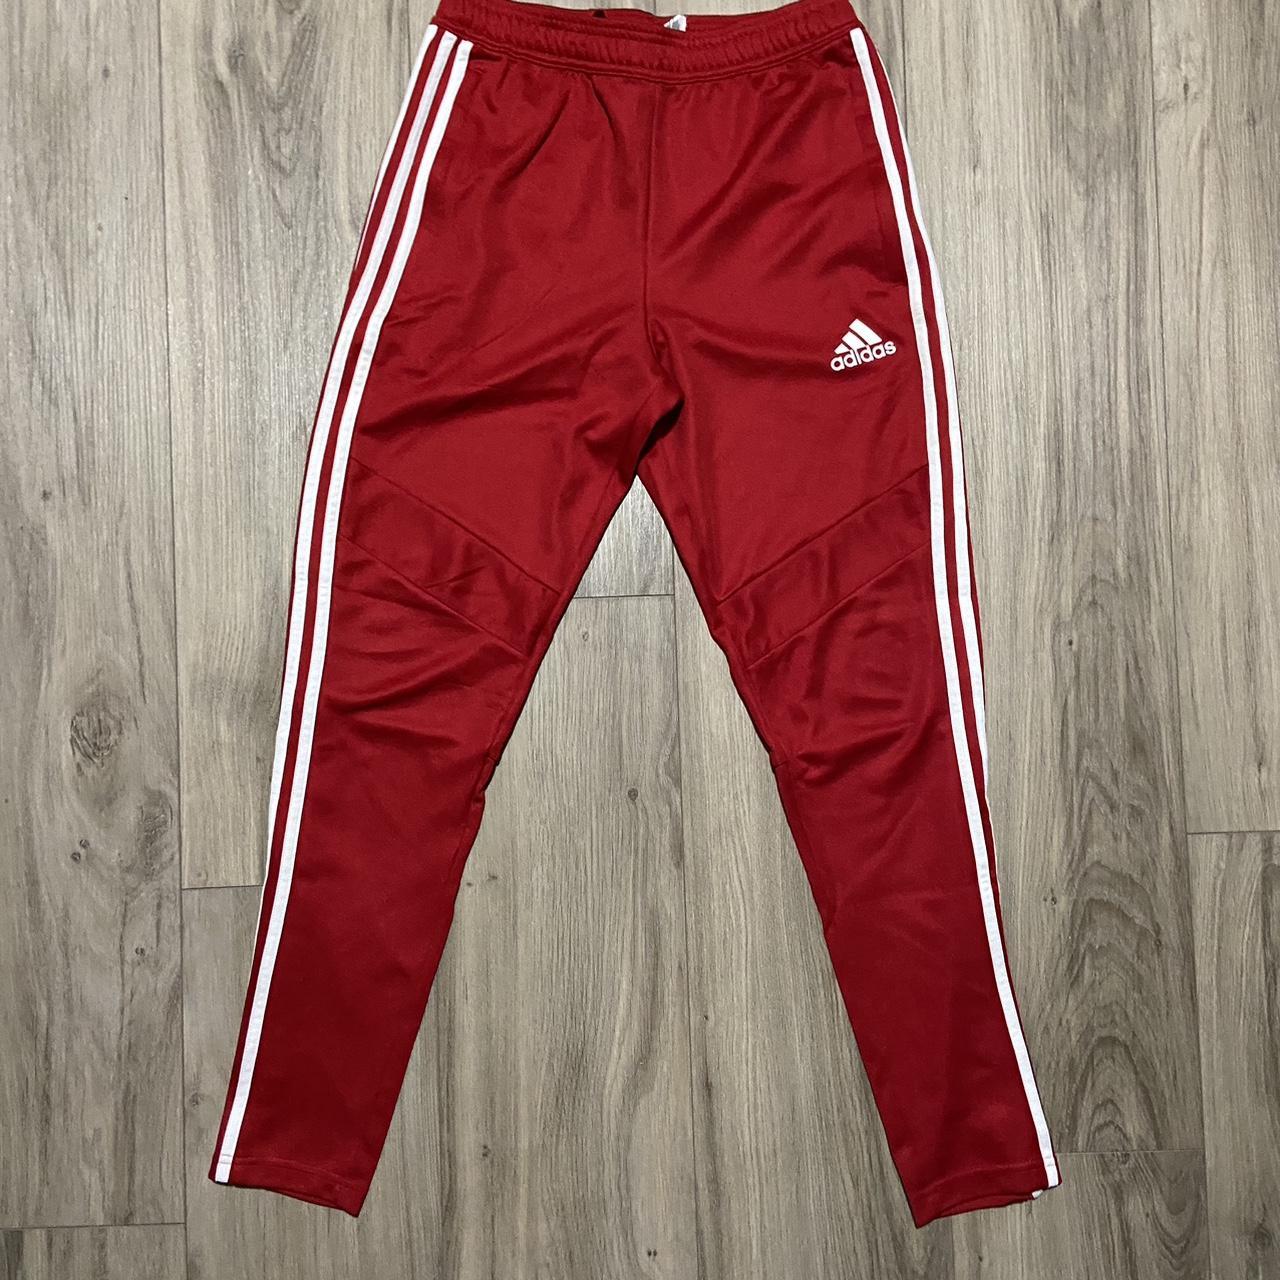 red adidas track pants good condition size s - Depop